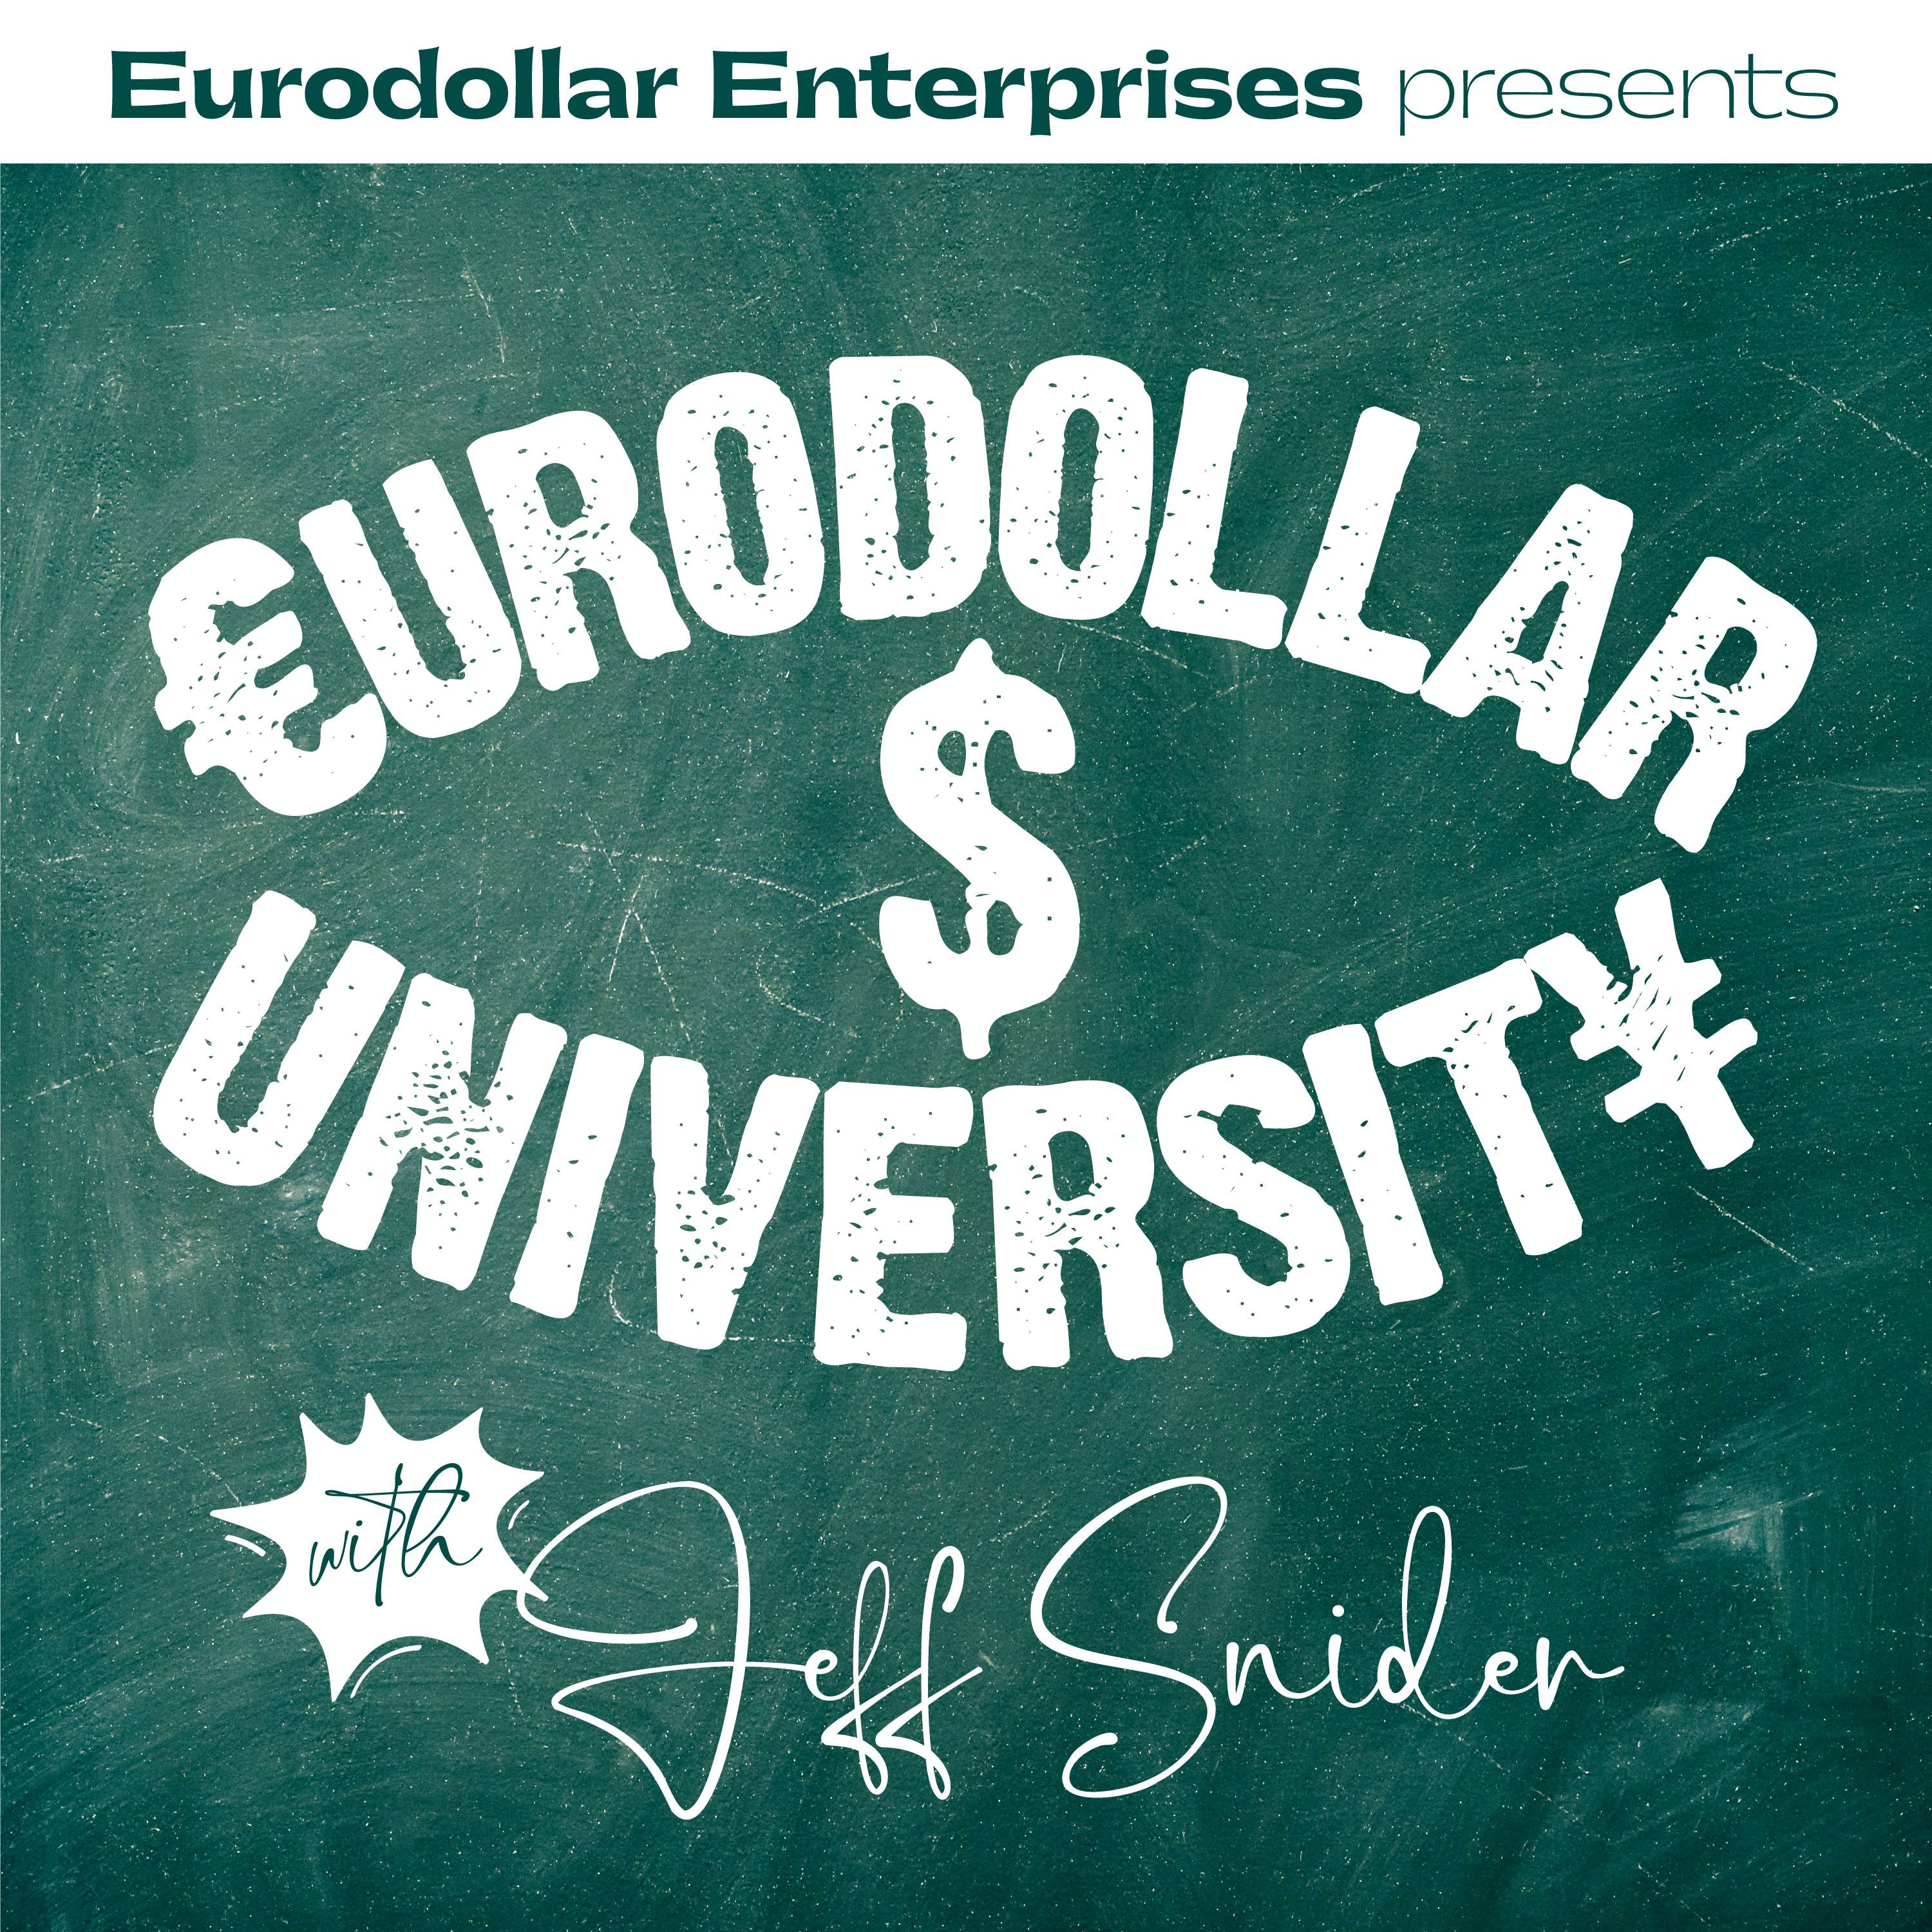 Financial Times says Fed is Central - We Disagree [Eurodollar University, Ep. 186]